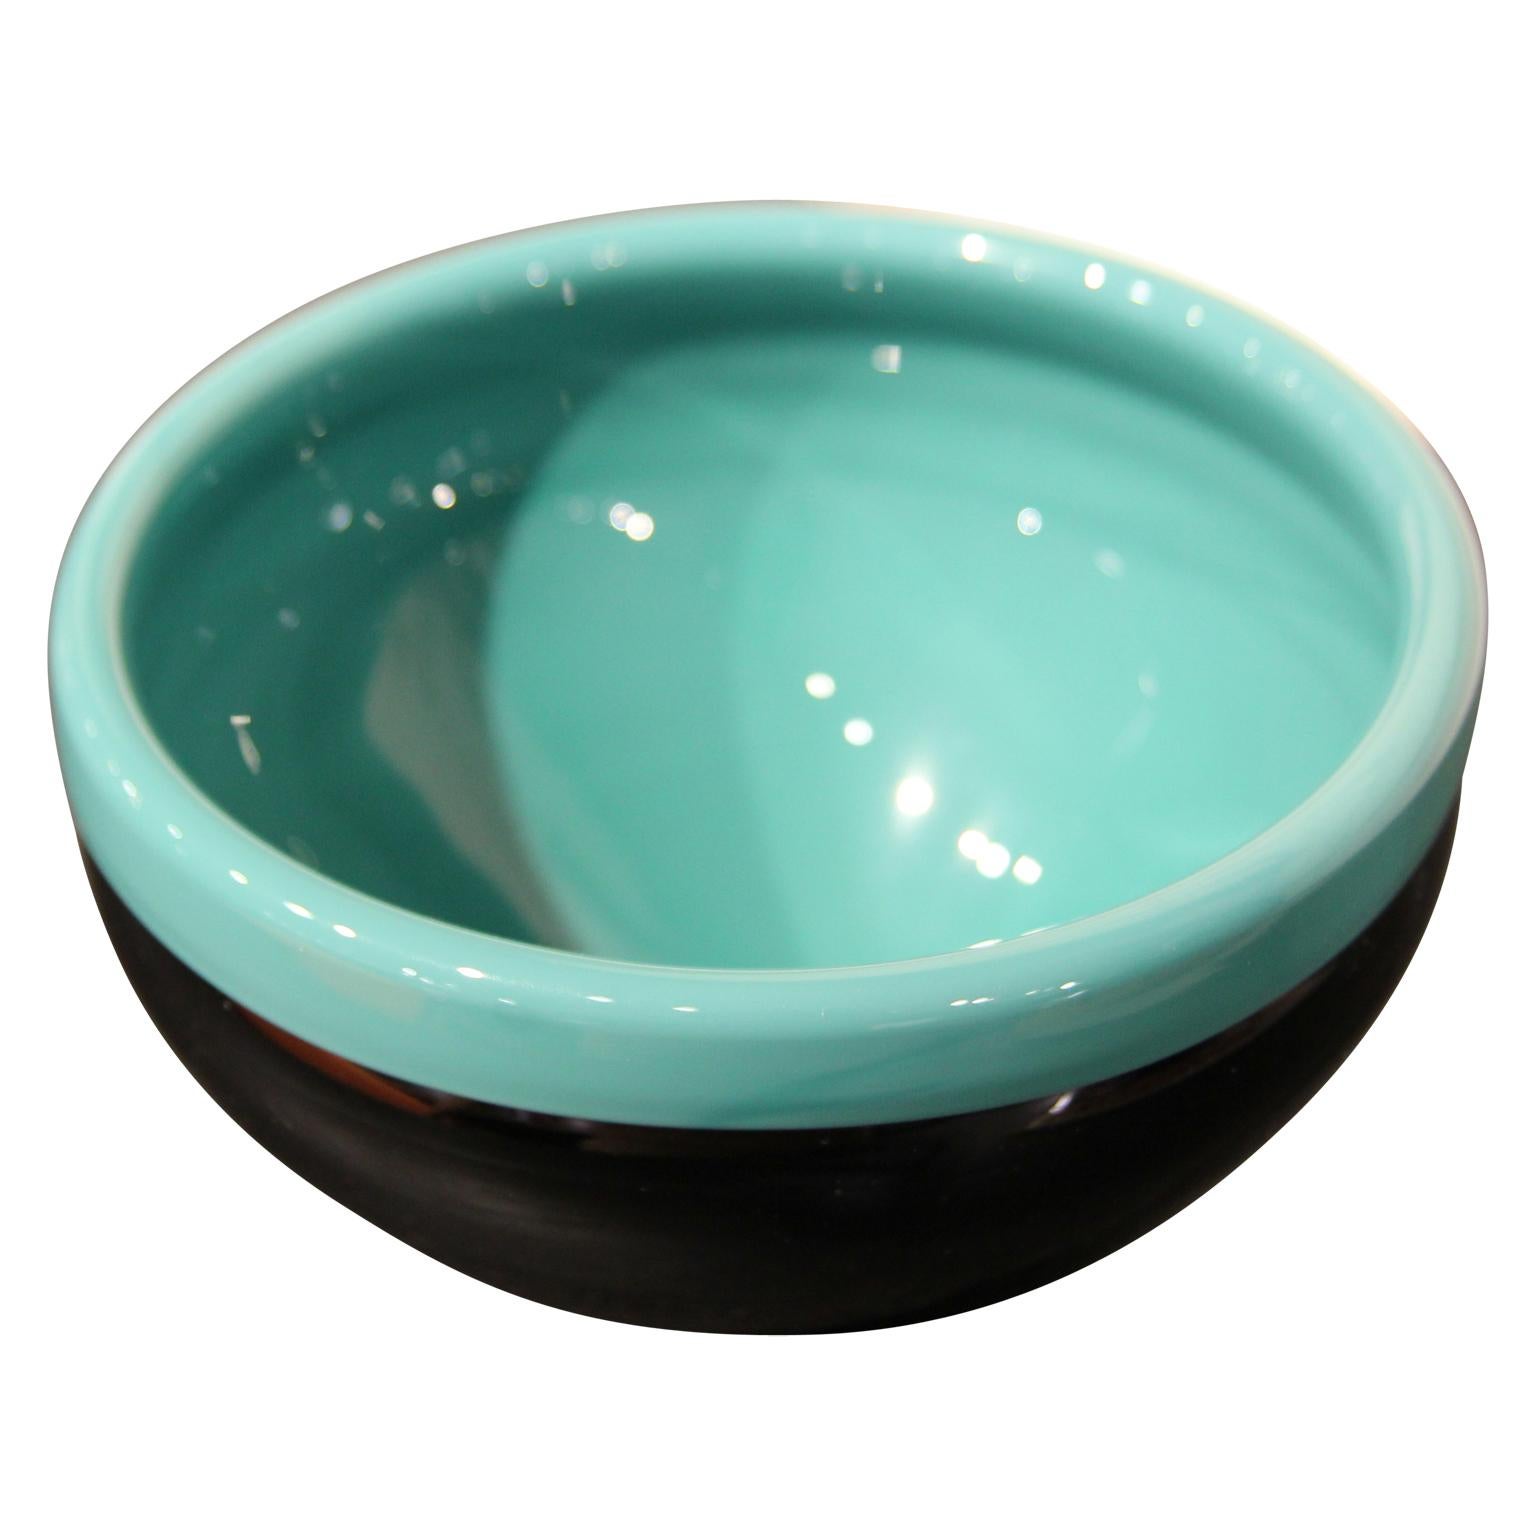 VeArt Murano glass bowl with a black bottom and a turquoise rim. It has a sticker identifying it as VeArt piece.